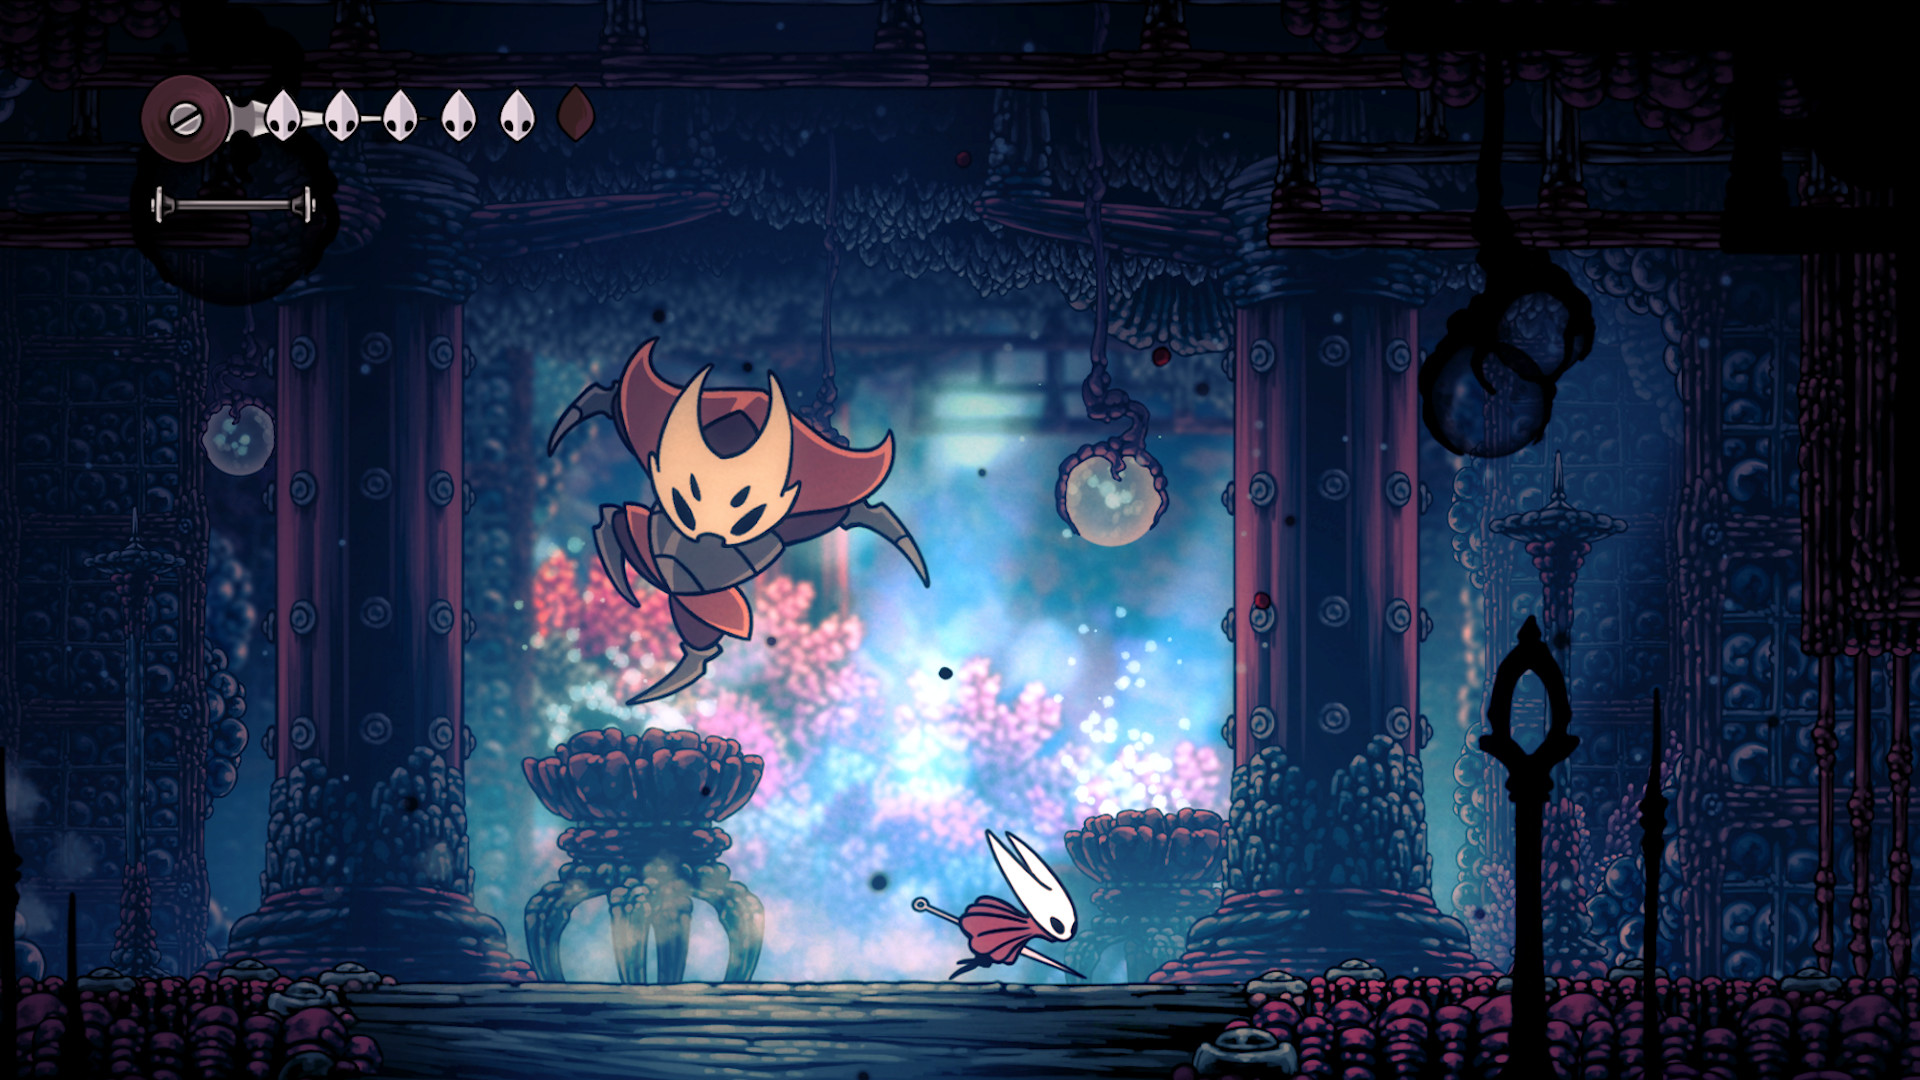 Indie Games to Watch in 2020: Platformers and Metroidvanias